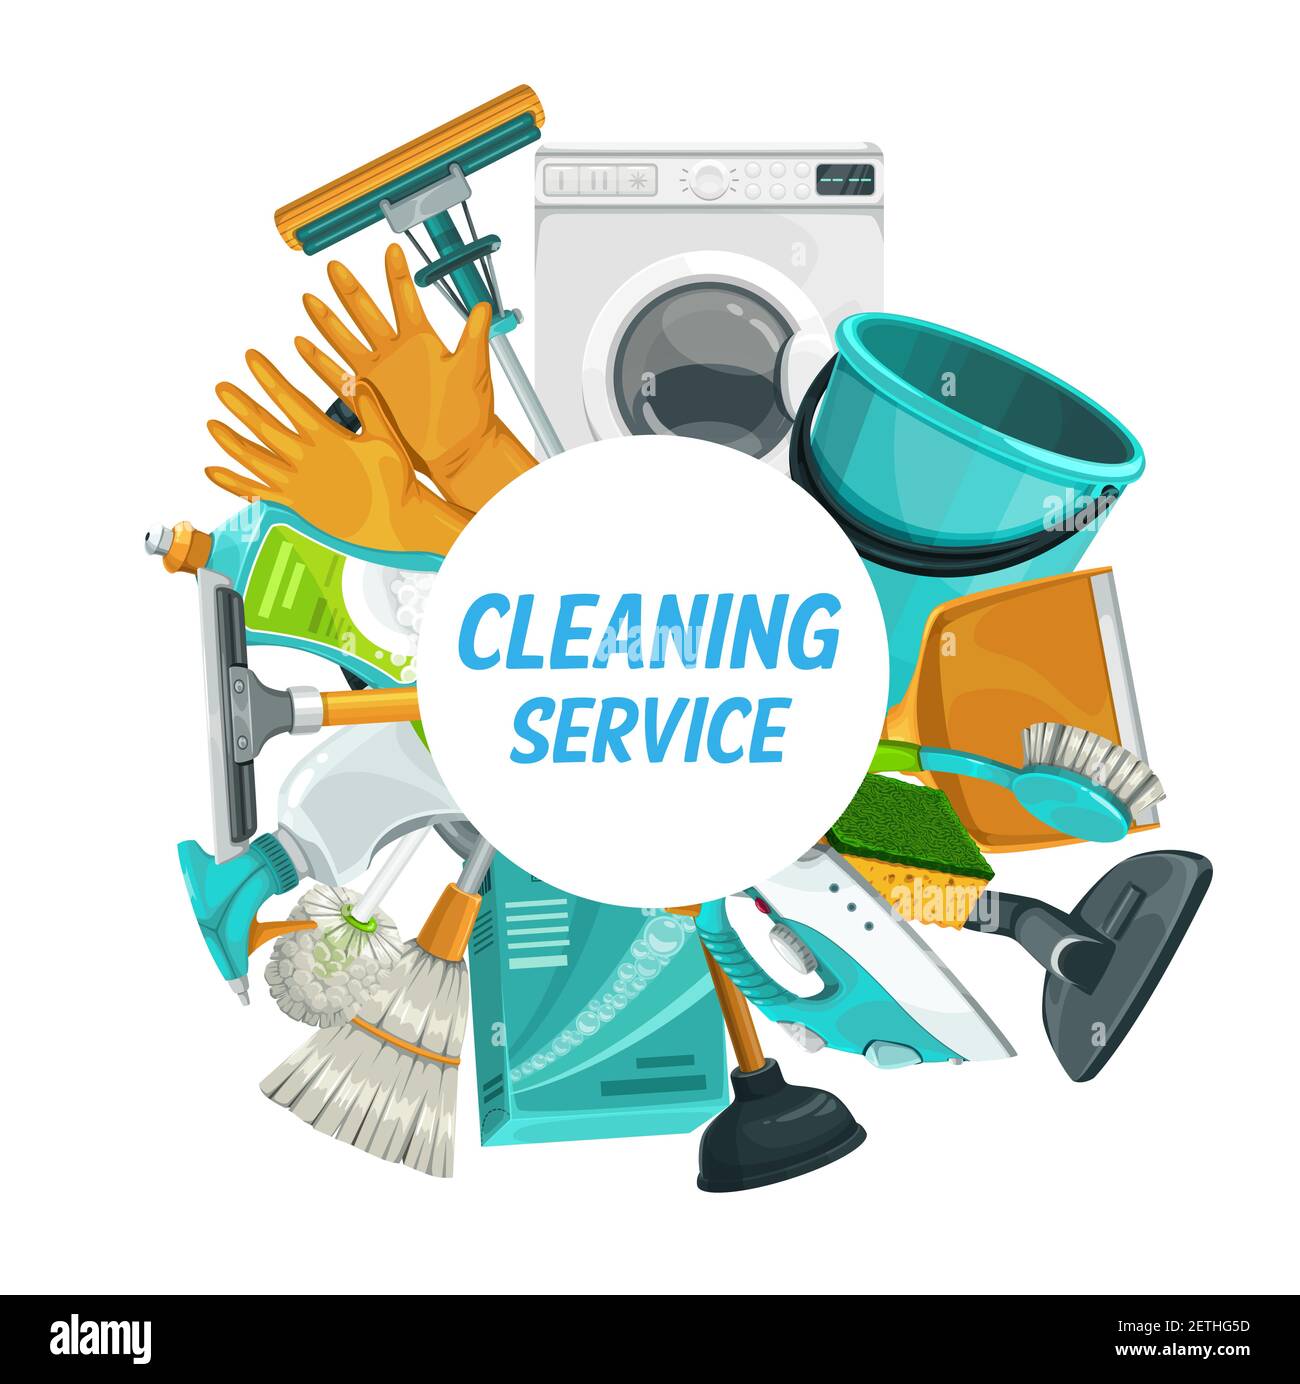 https://c8.alamy.com/comp/2ETHG5D/house-cleaning-service-home-laundry-and-housework-cleaners-vector-banner-clean-home-service-household-cleaning-tools-and-supplies-brush-mop-laund-2ETHG5D.jpg